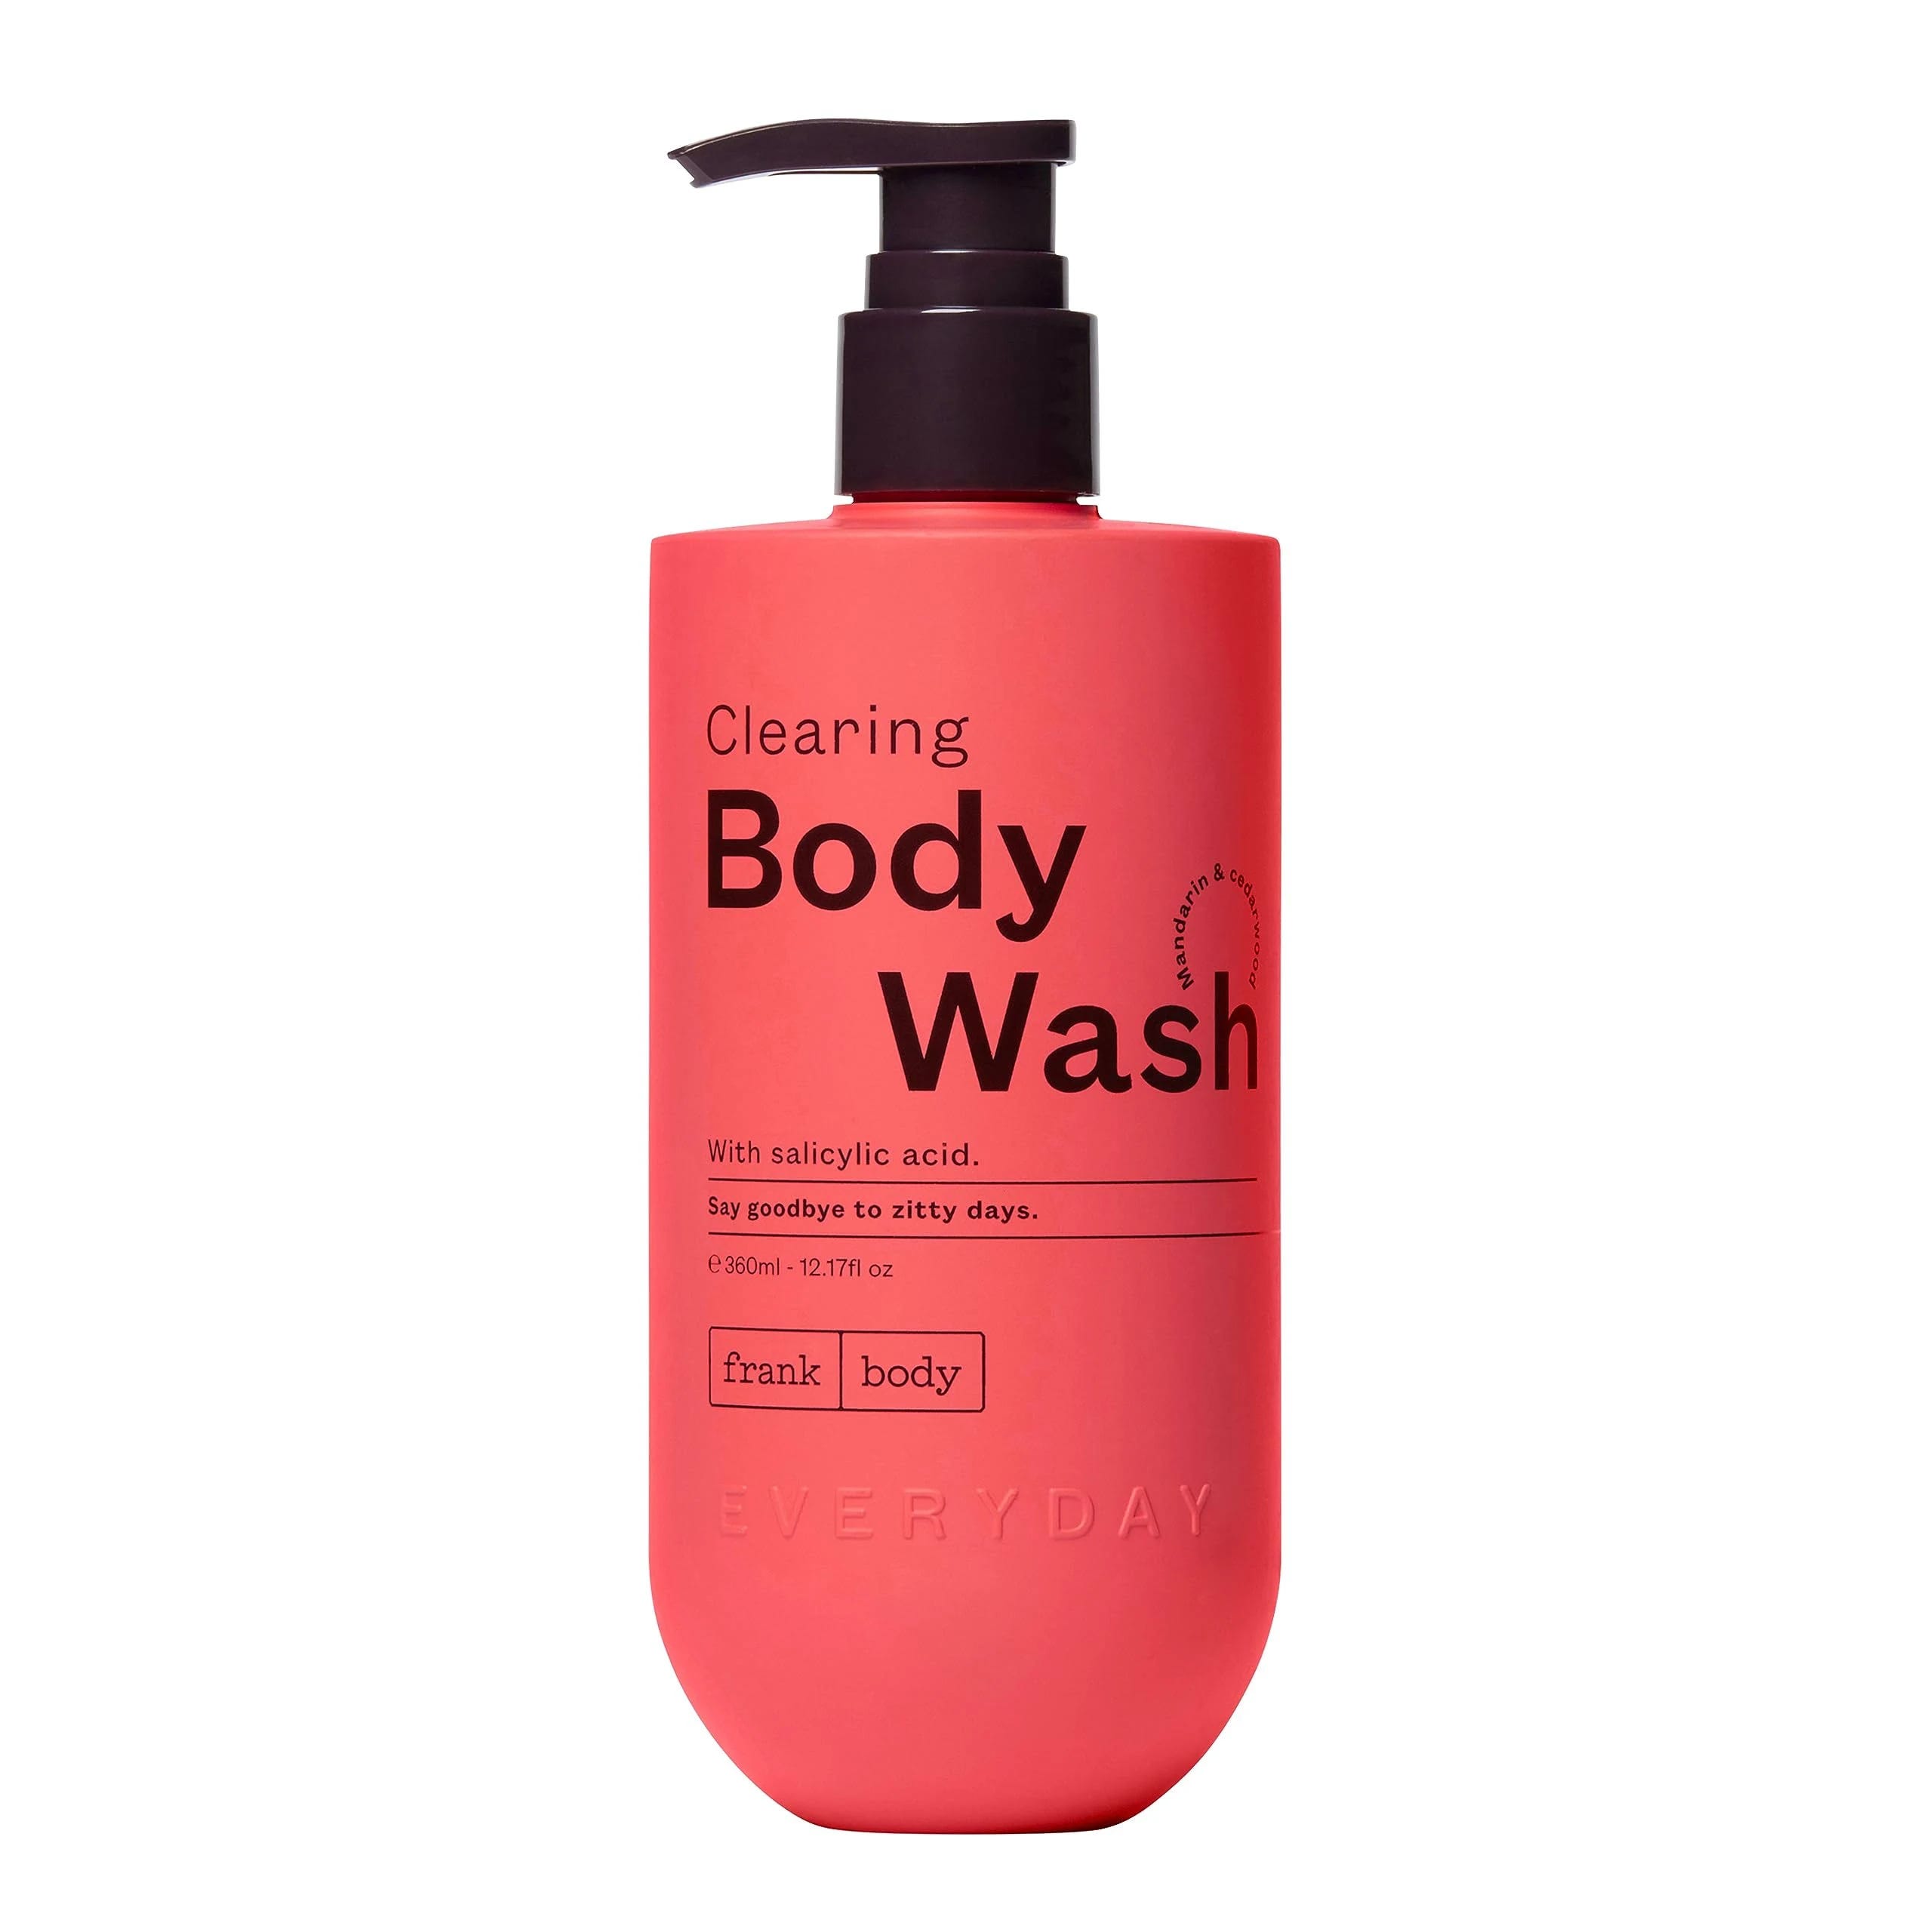 Frank Body Everyday Clearing Body Wash for Acne-Prone Skin | Image